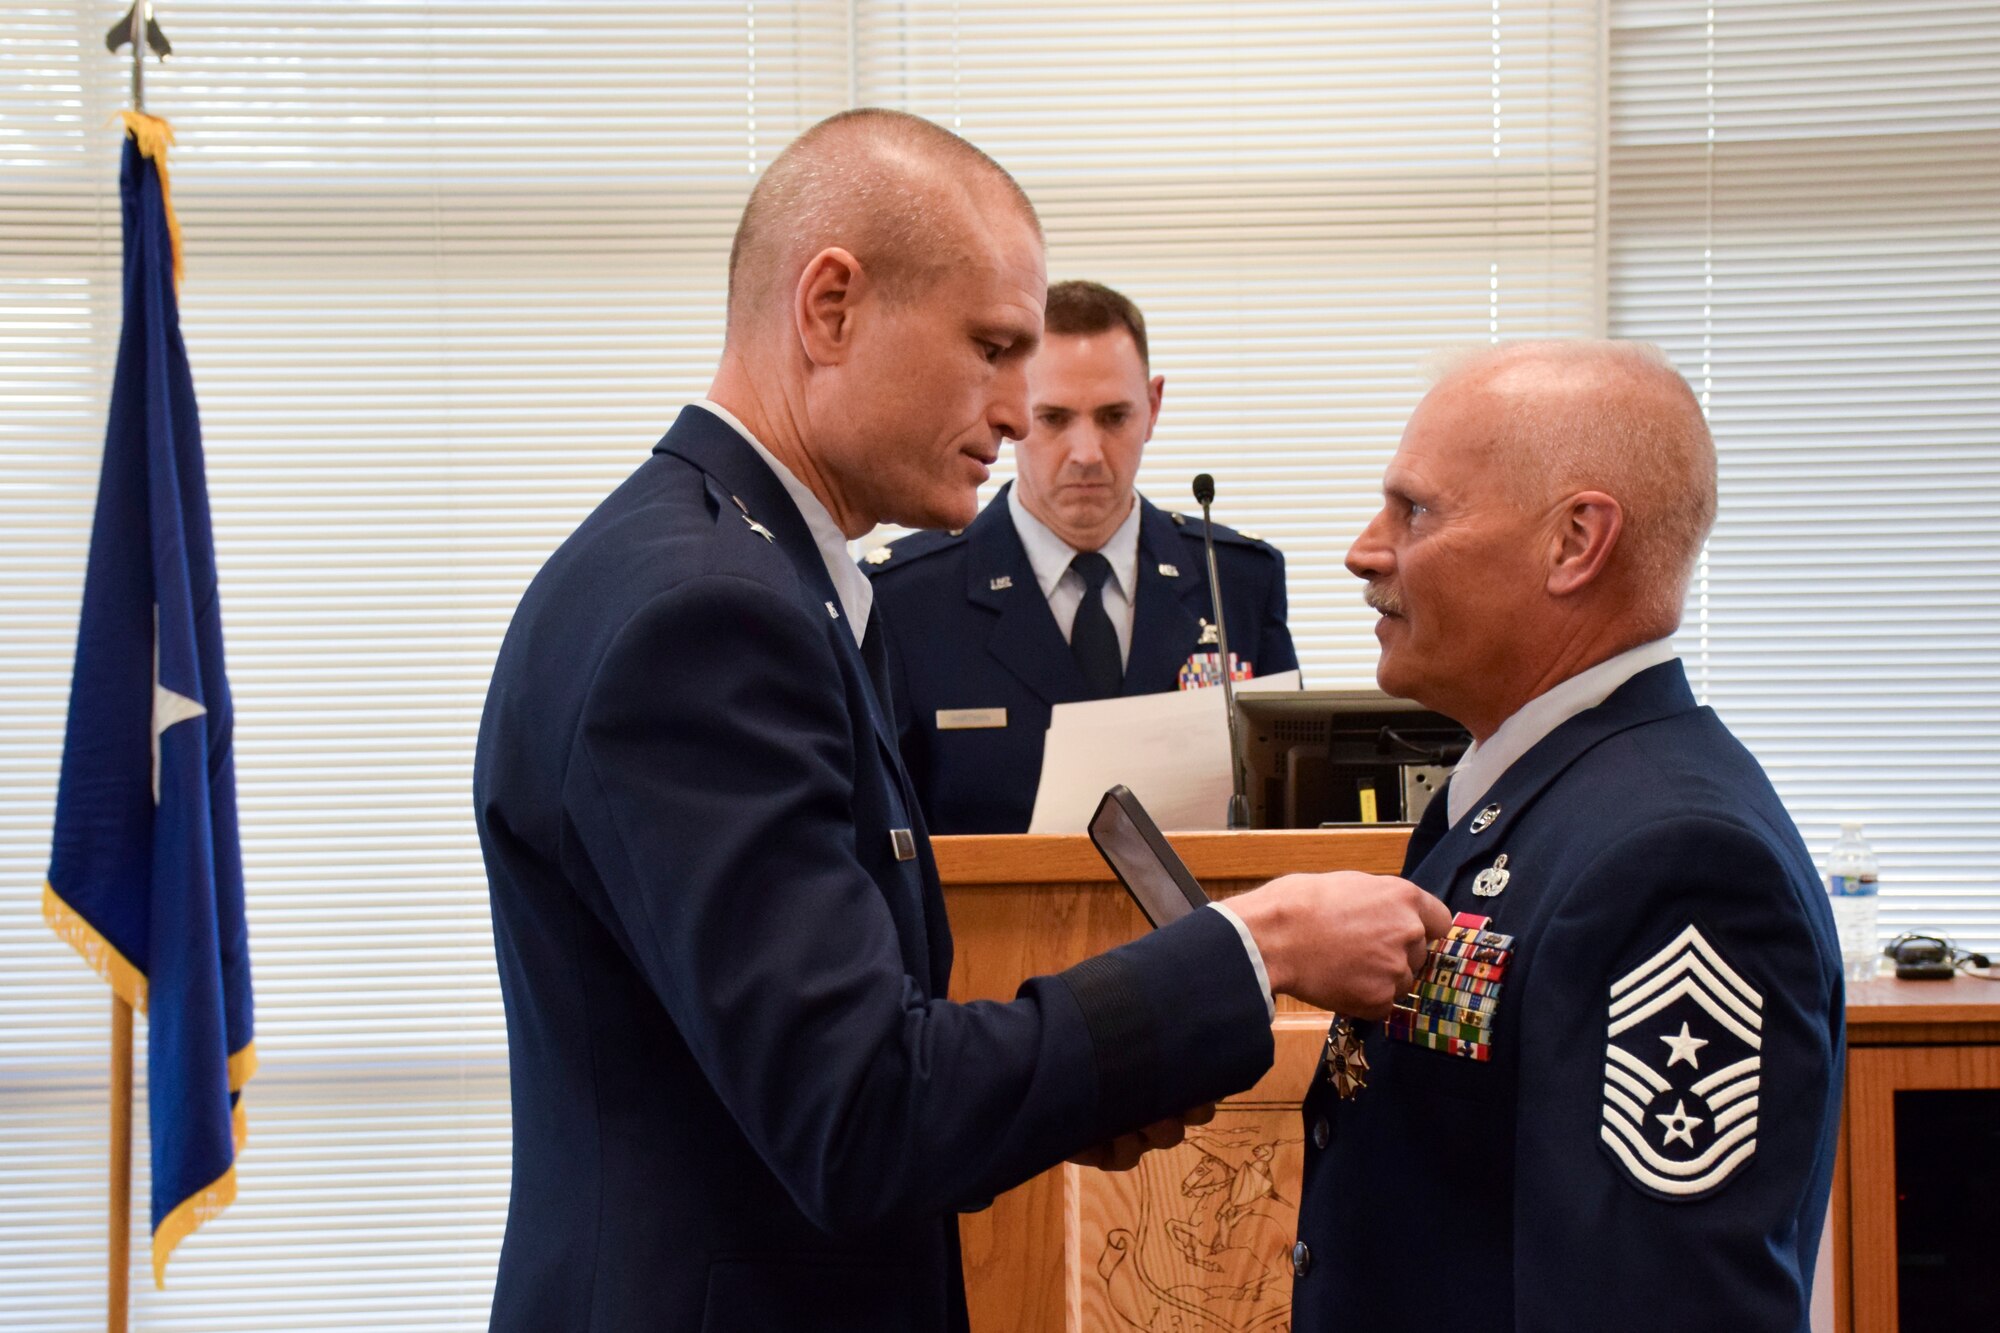 Brig. Gen. Shawn Ford (left), Deputy Adjutant General for Air, Iowa National Guard, presents Chief Master Sgt. Timothy E. Cochran (right), former Command Chief Master Sgt. (CCM) of the Iowa Air National Guard, with the Legion of Merit award during his retirement ceremony held in the dining facility of the 132d Wing in Des Moines, Iowa on Saturday, December 7, 2019.  Cochran is the 6th CCM of Iowa and has served the state and Air Guard for over thirty-eight years.  (Air National Guard photo by Tech. Sgt. Linda K. Burger/Released)